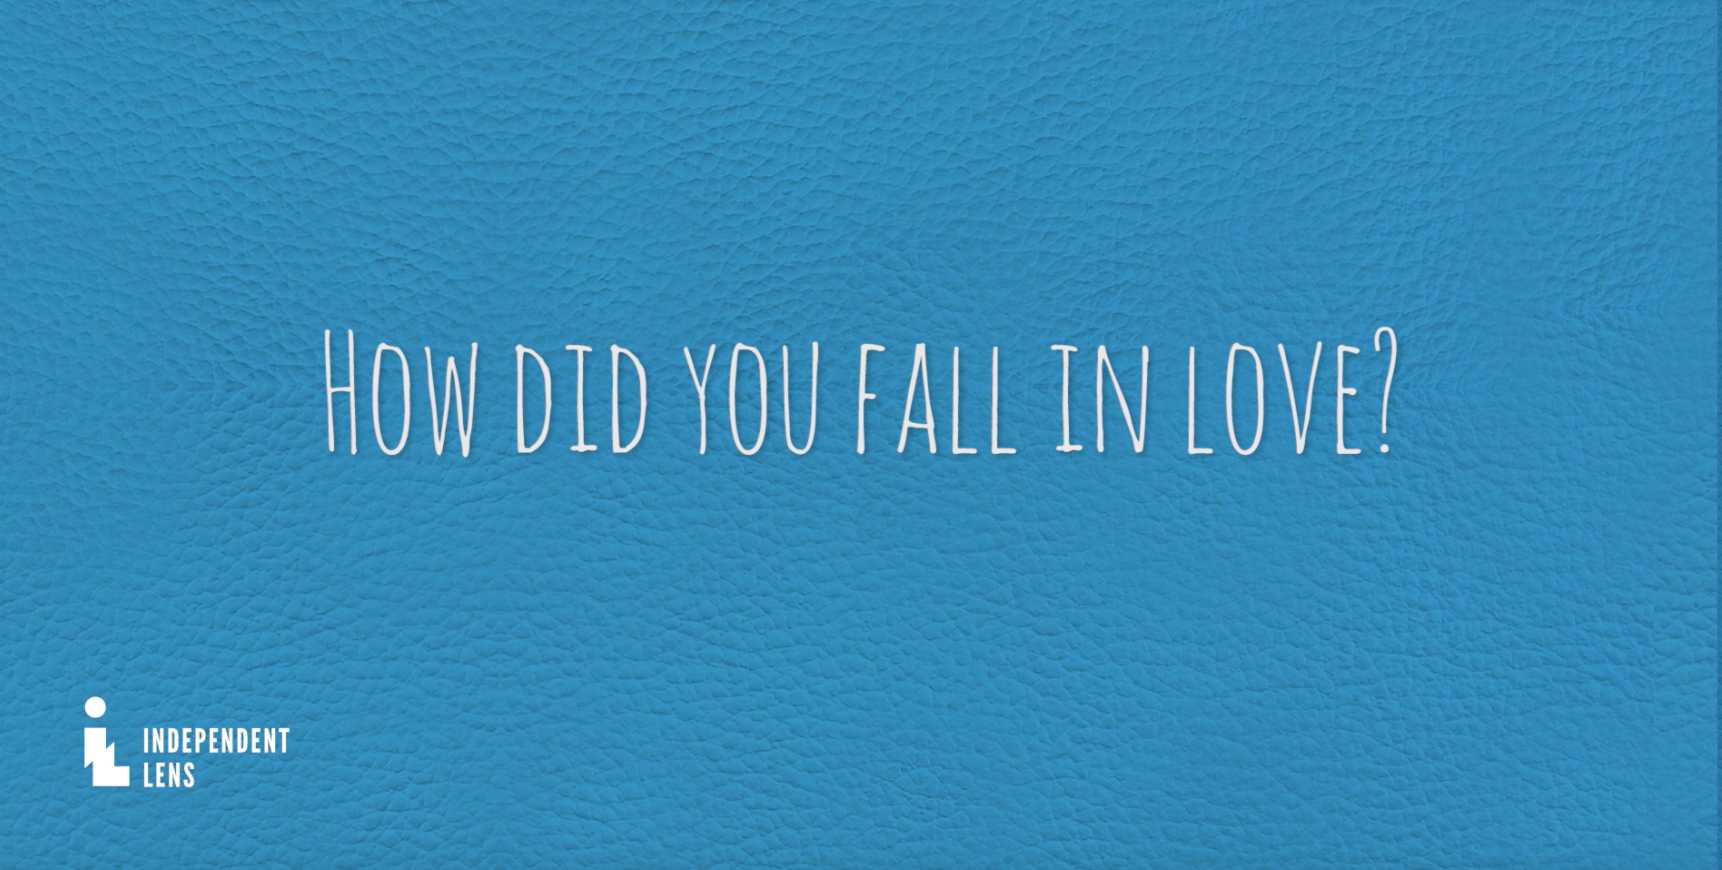 How Did You Fall in Love? a title card, and key question from new interview with Champa and Vasant, parents of Geeta and Ravi Patel